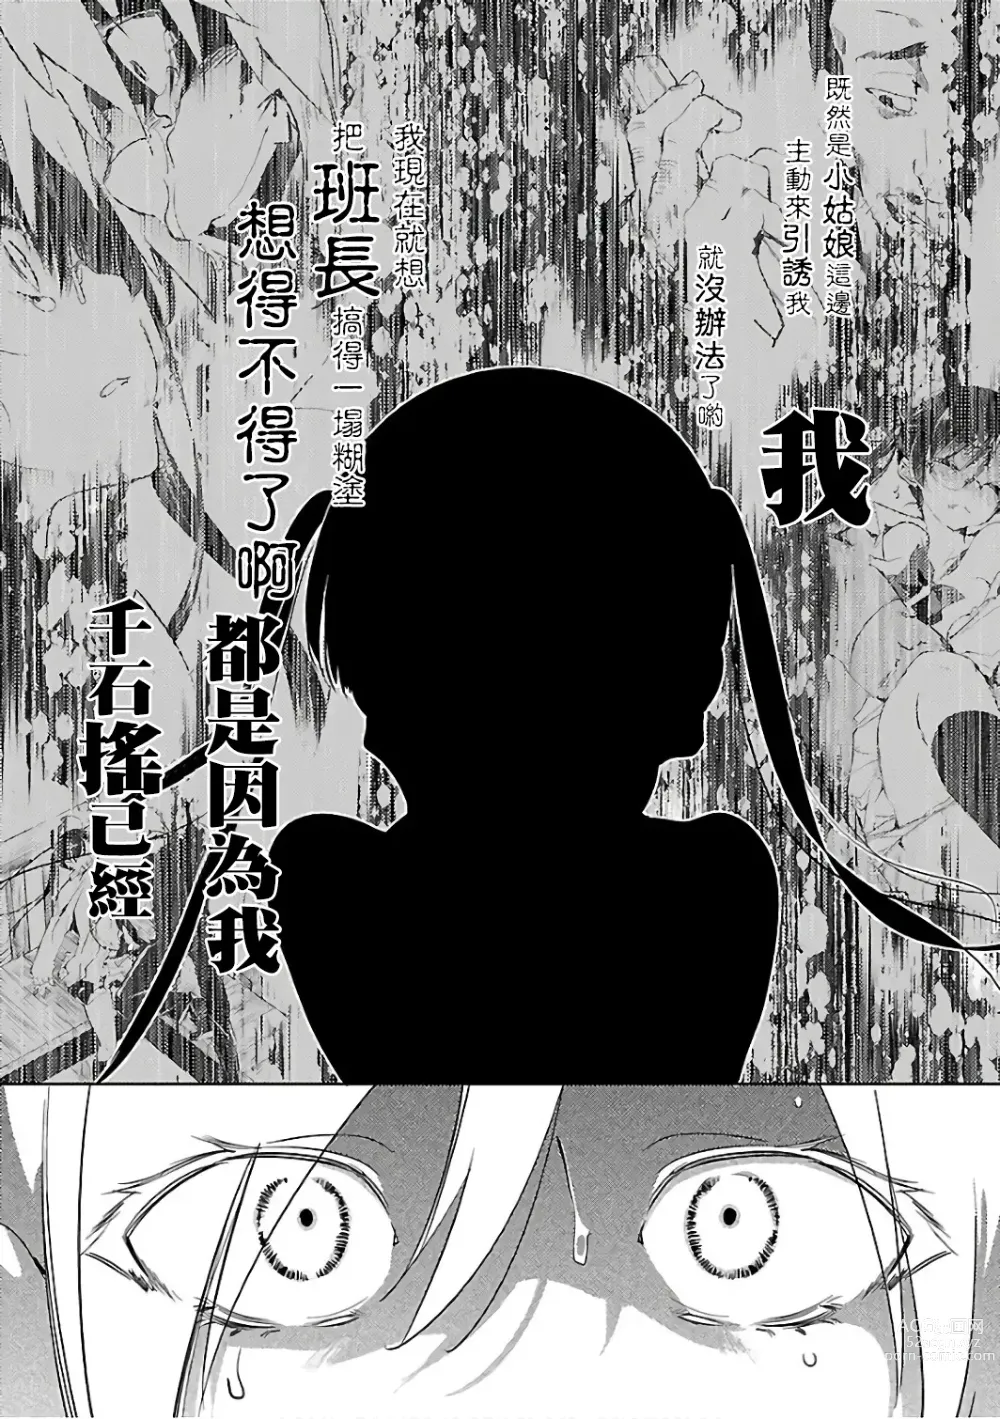 Page 6 of doujinshi 神さまの怨結び 第6巻